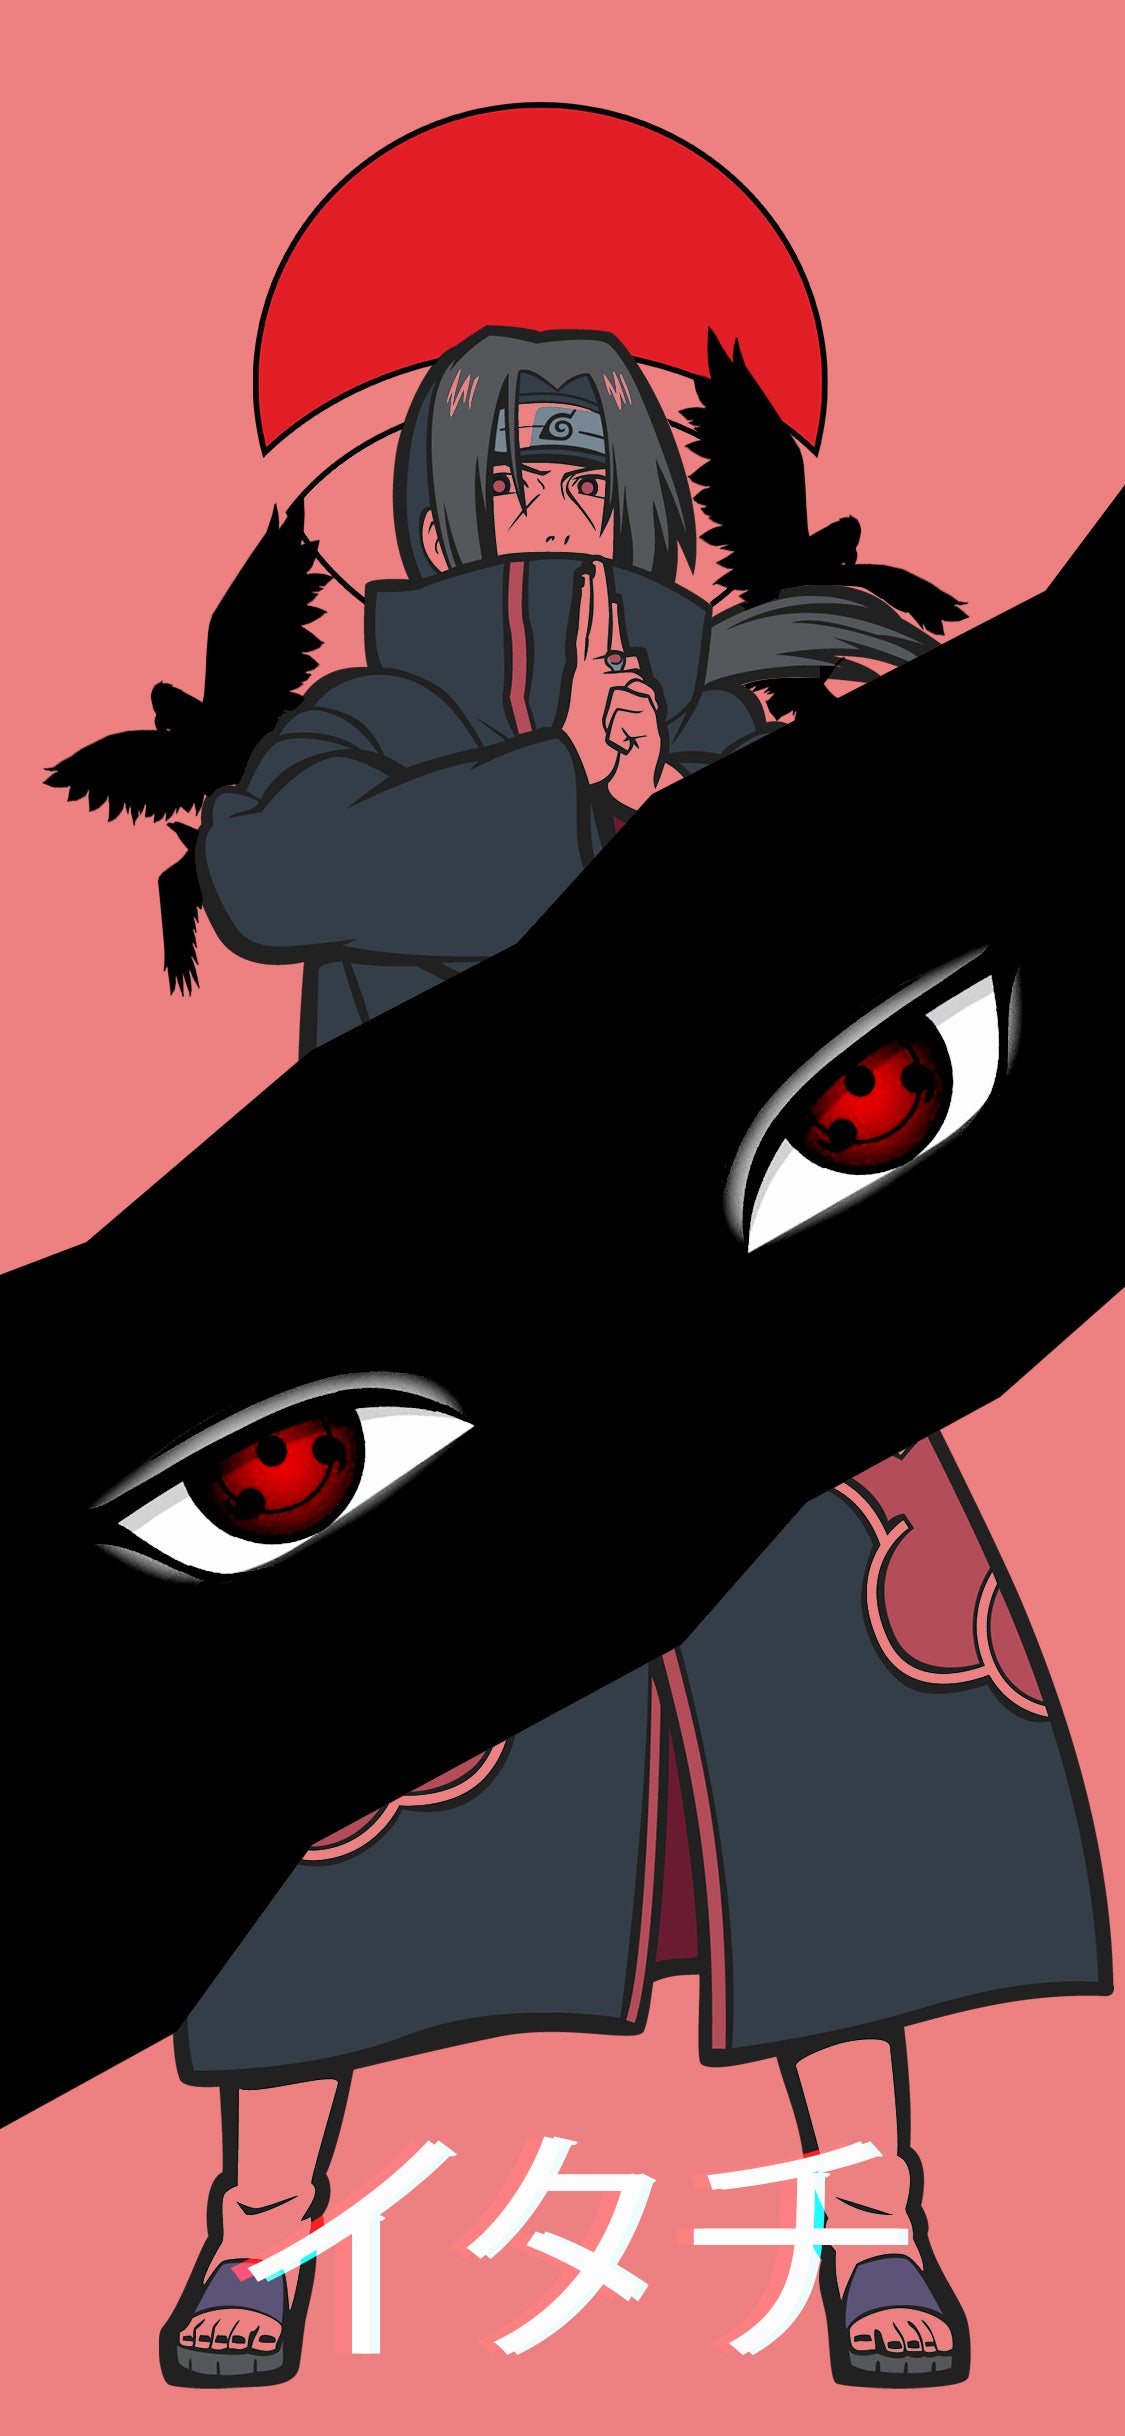 Wallpaper I made of one of my favourite characters, Itachi. Hope you guys like it. [OC]